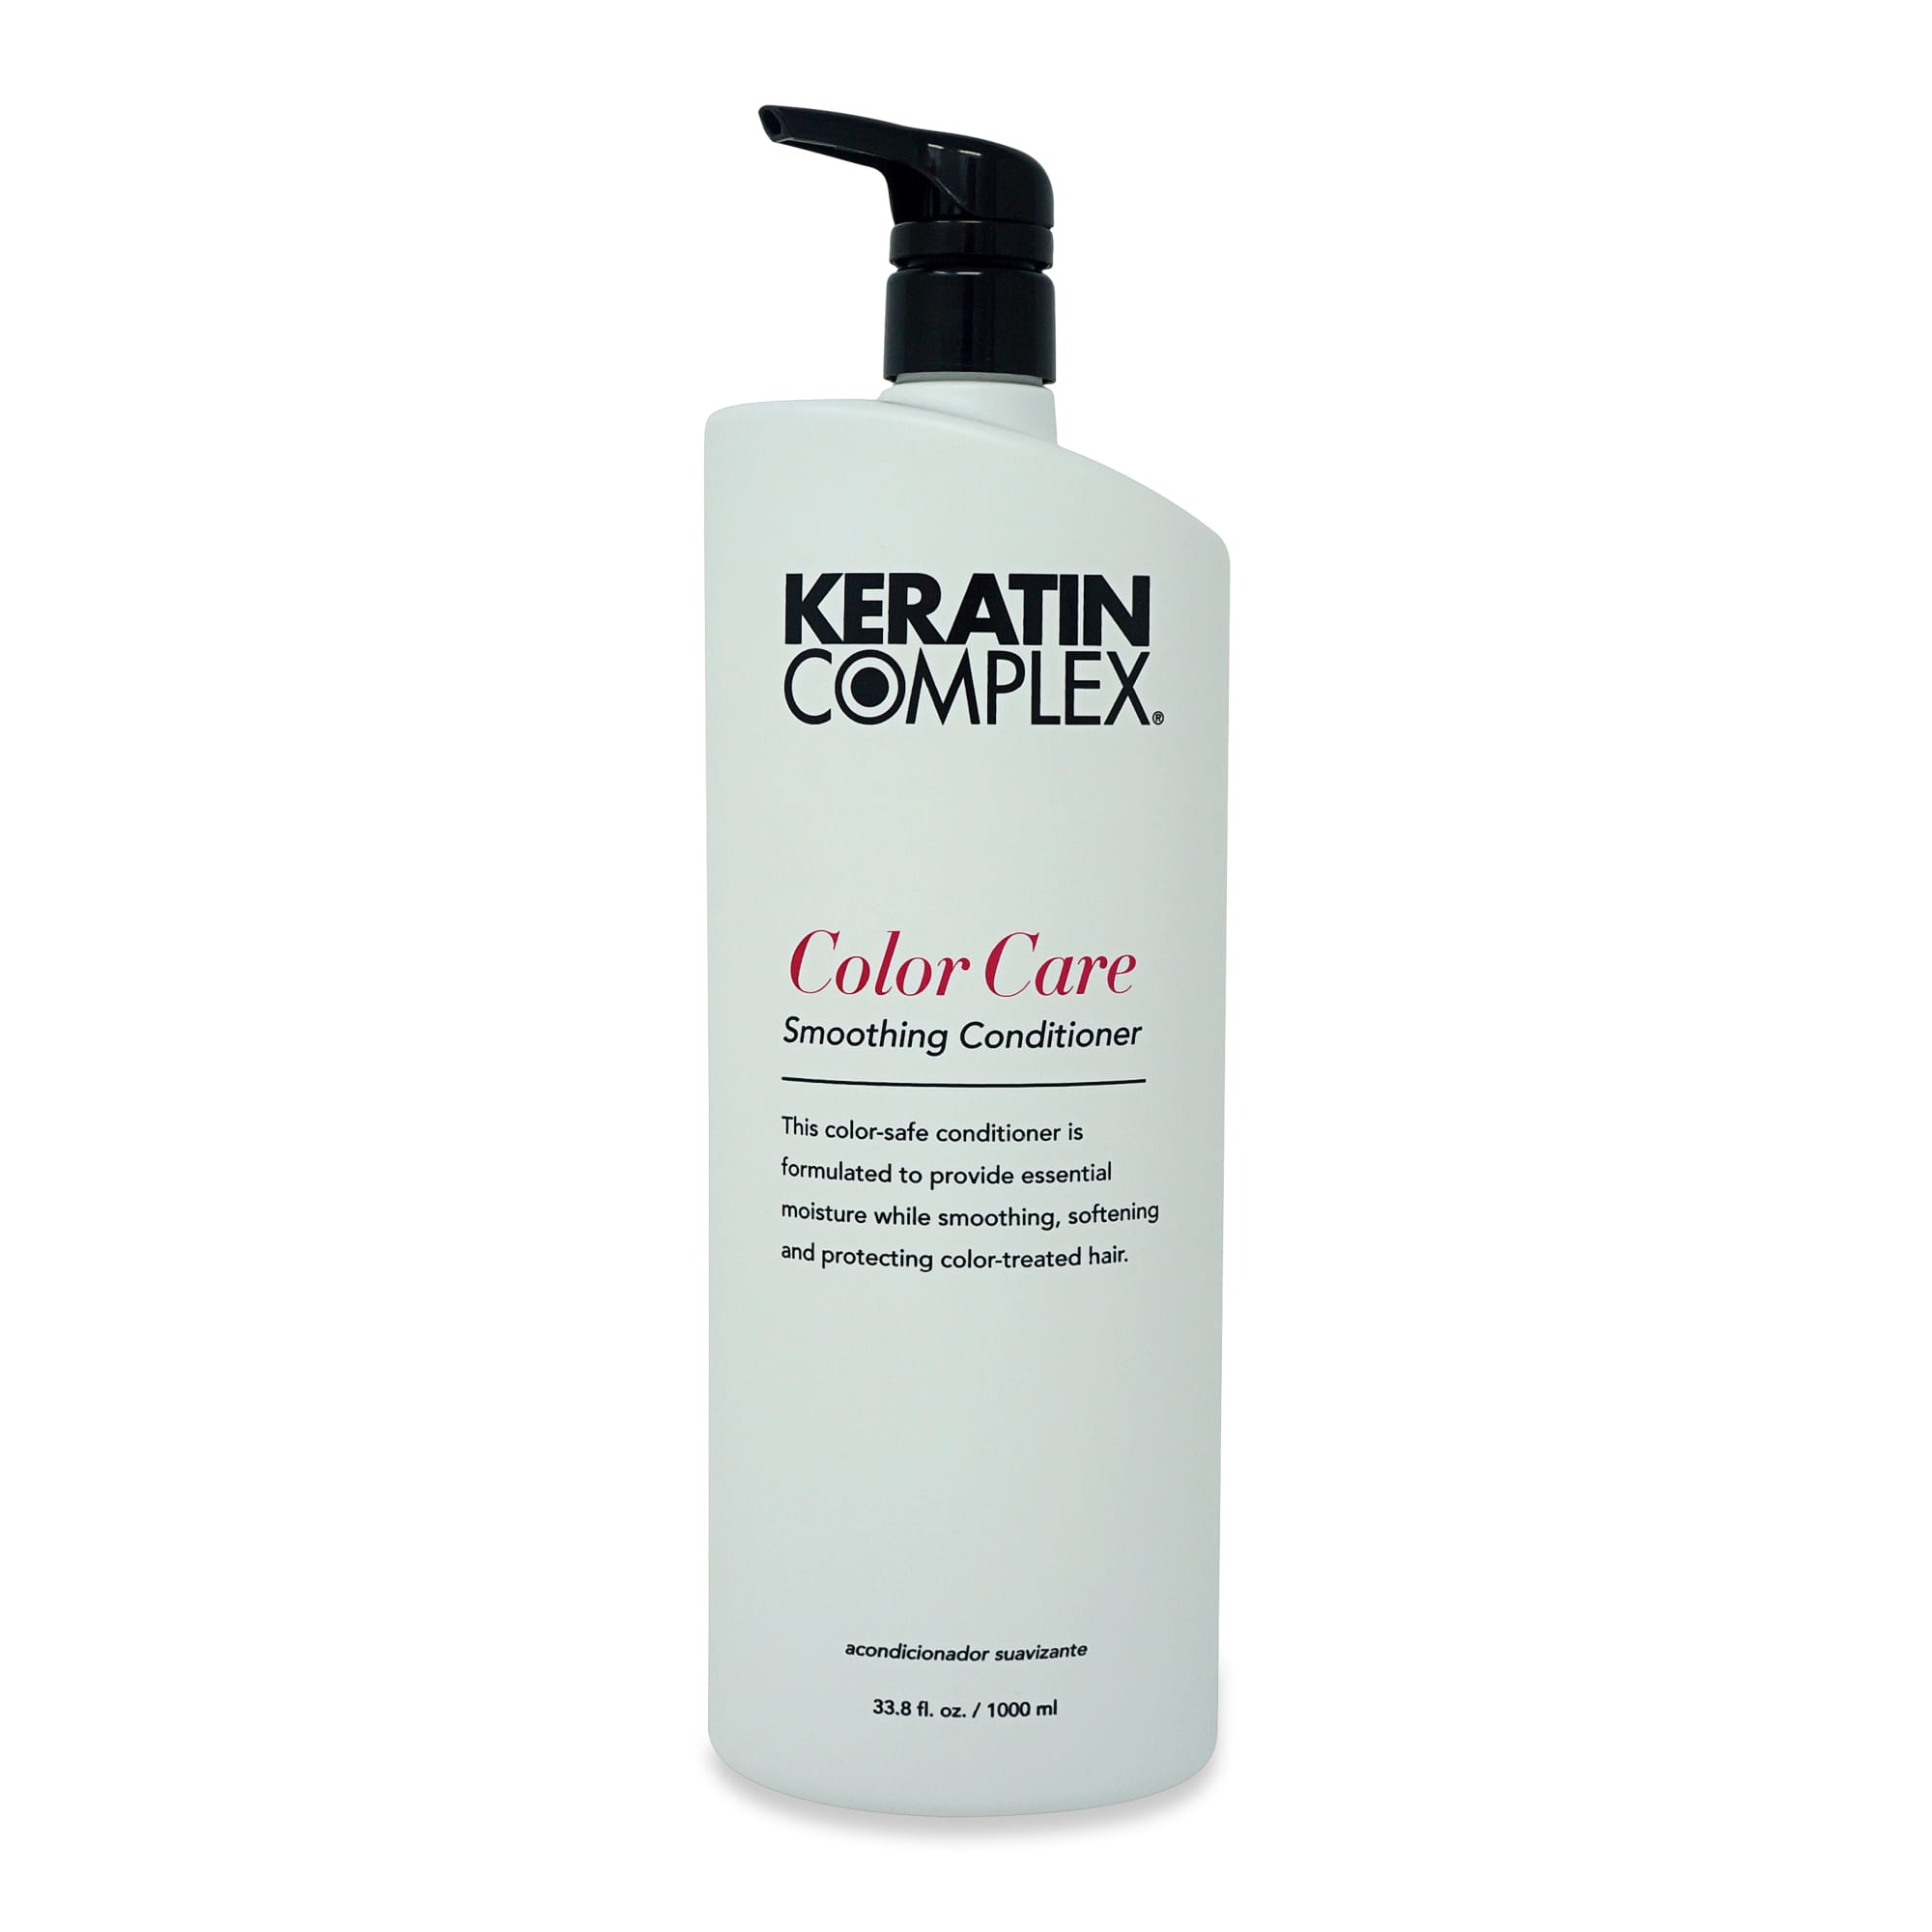 keratin-complex-color-care-smoothing-conditioner-33.8oz-1419624.1-1